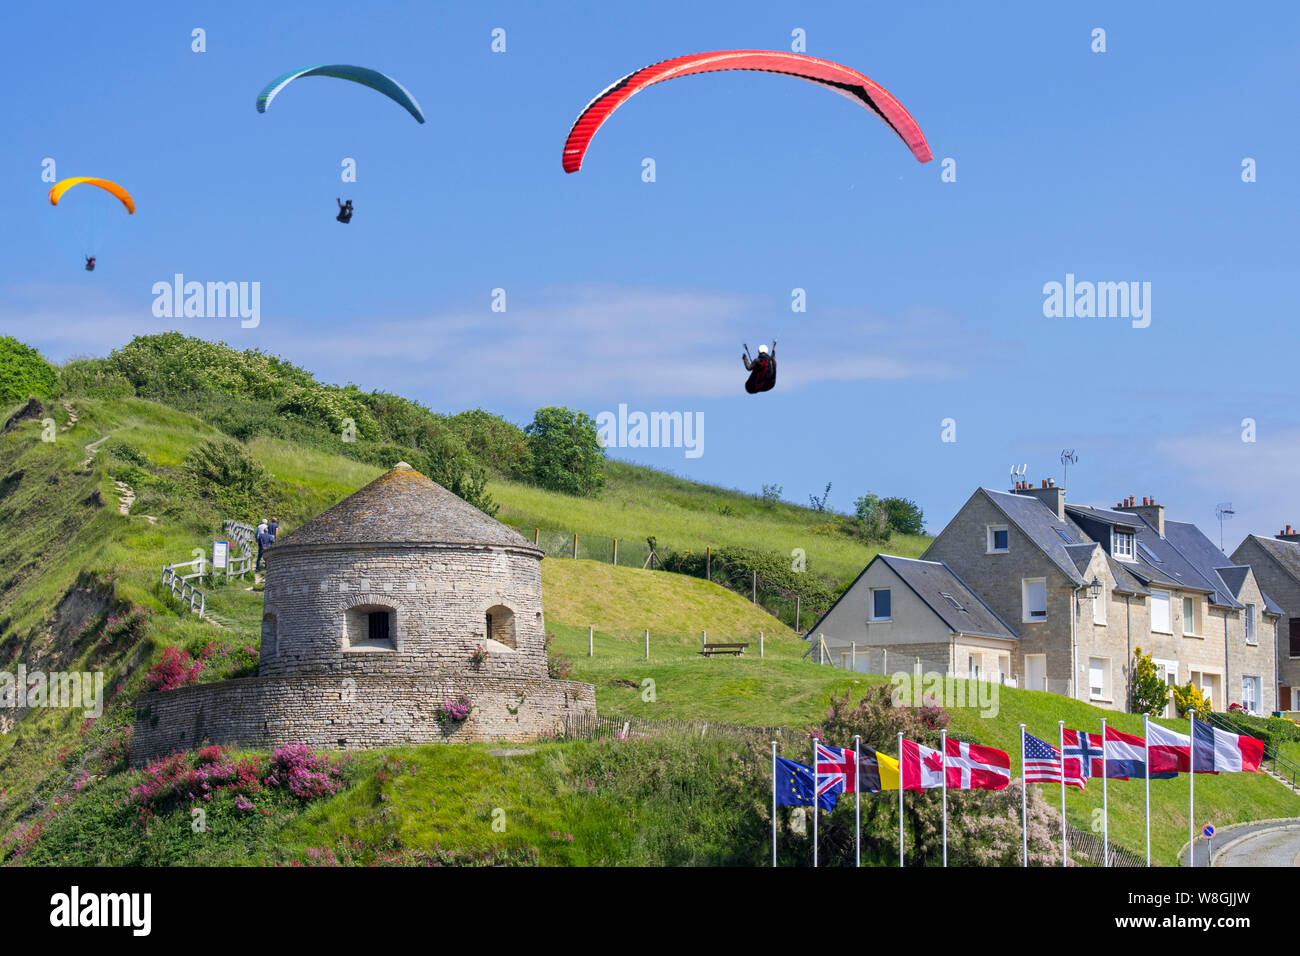 Flying / soaring paragliders above the 17th century Tour Vauban tower at Port-en-Bessin-Huppain along the English Channel, Calvados, Normandy, France Stock Photo